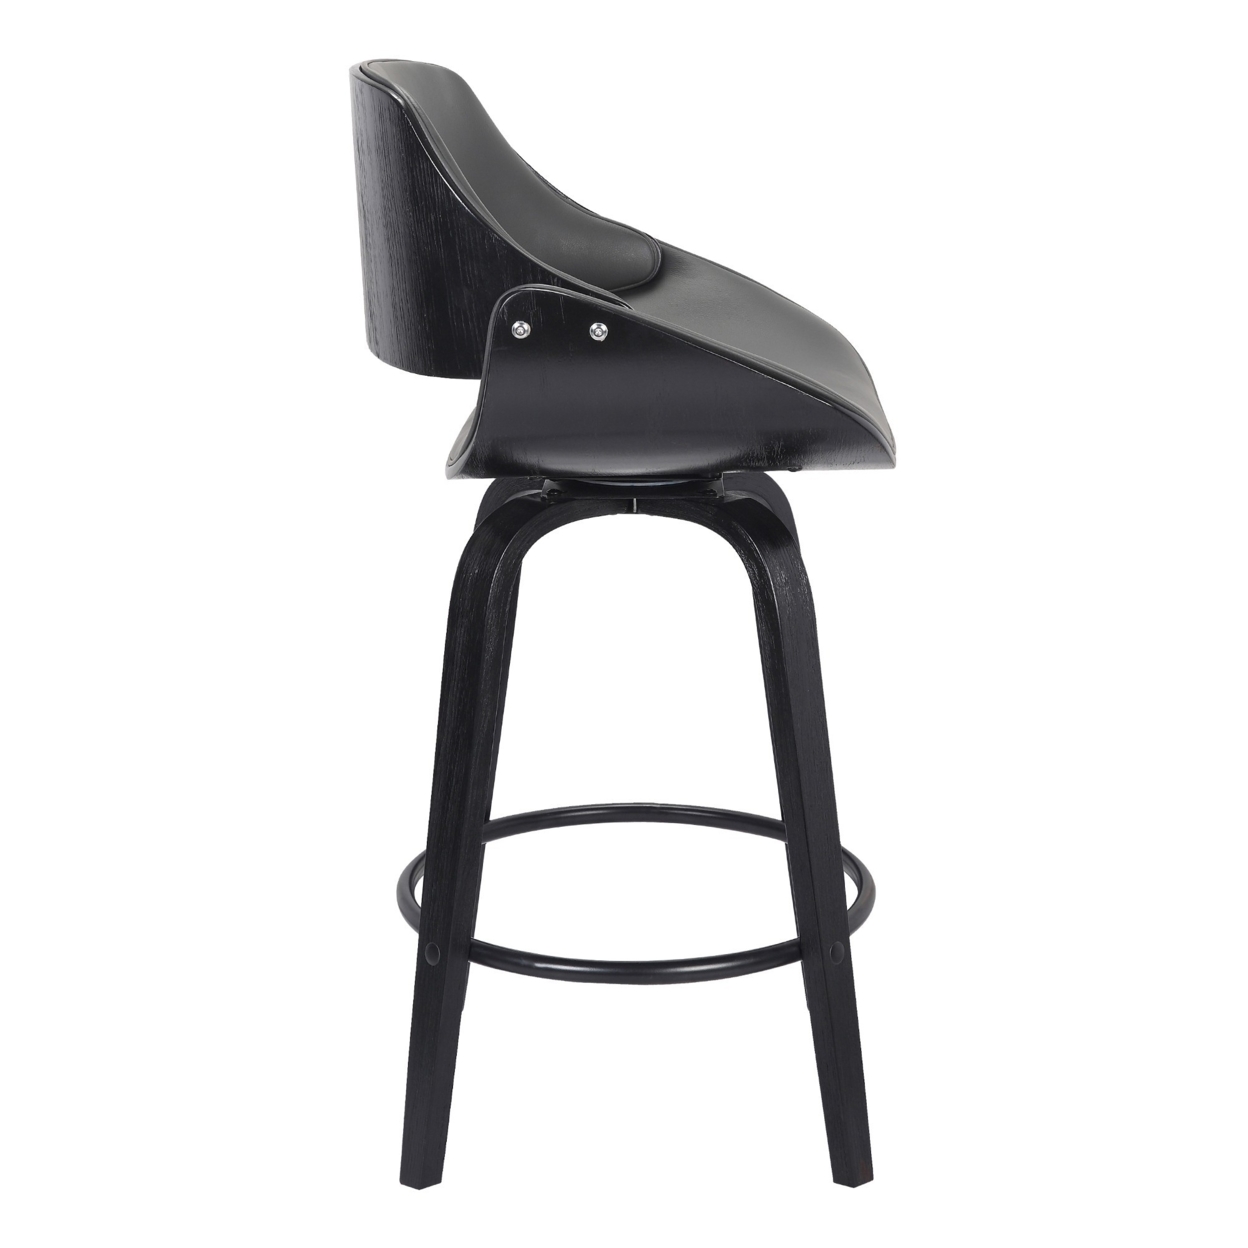 26 Inch Leatherette And Wooden Swivel Barstool, Black And Gray- Saltoro Sherpi